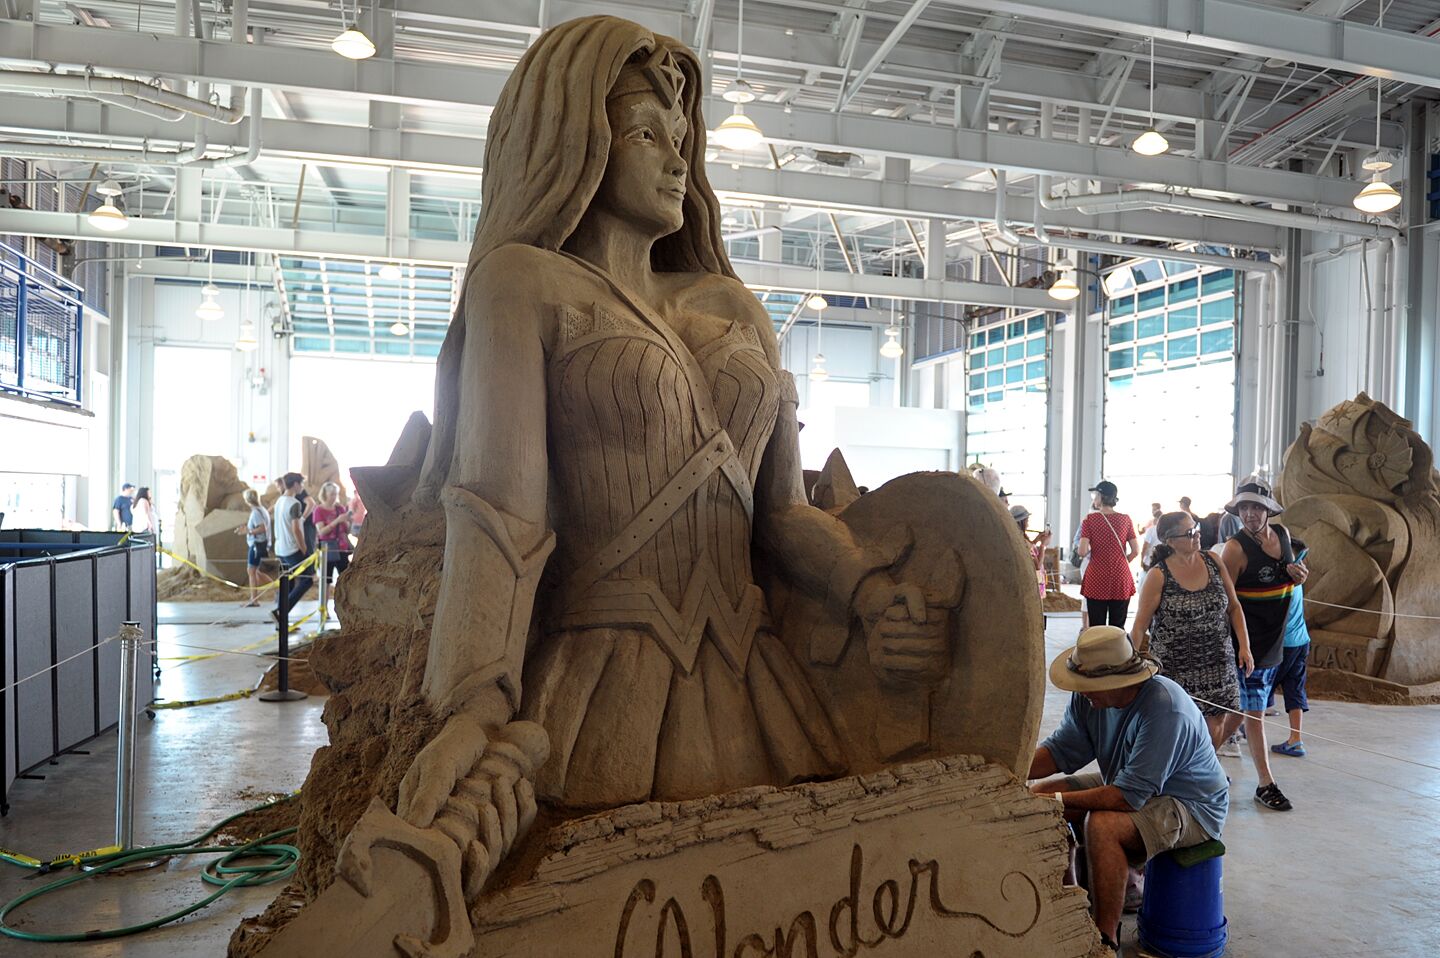 Participants at the U.S. Sand Sculpting Challenge and 3D Art Expo at Broadway Pier weren't afraid to get a little dirty on Saturday, Aug. 31, 2019.